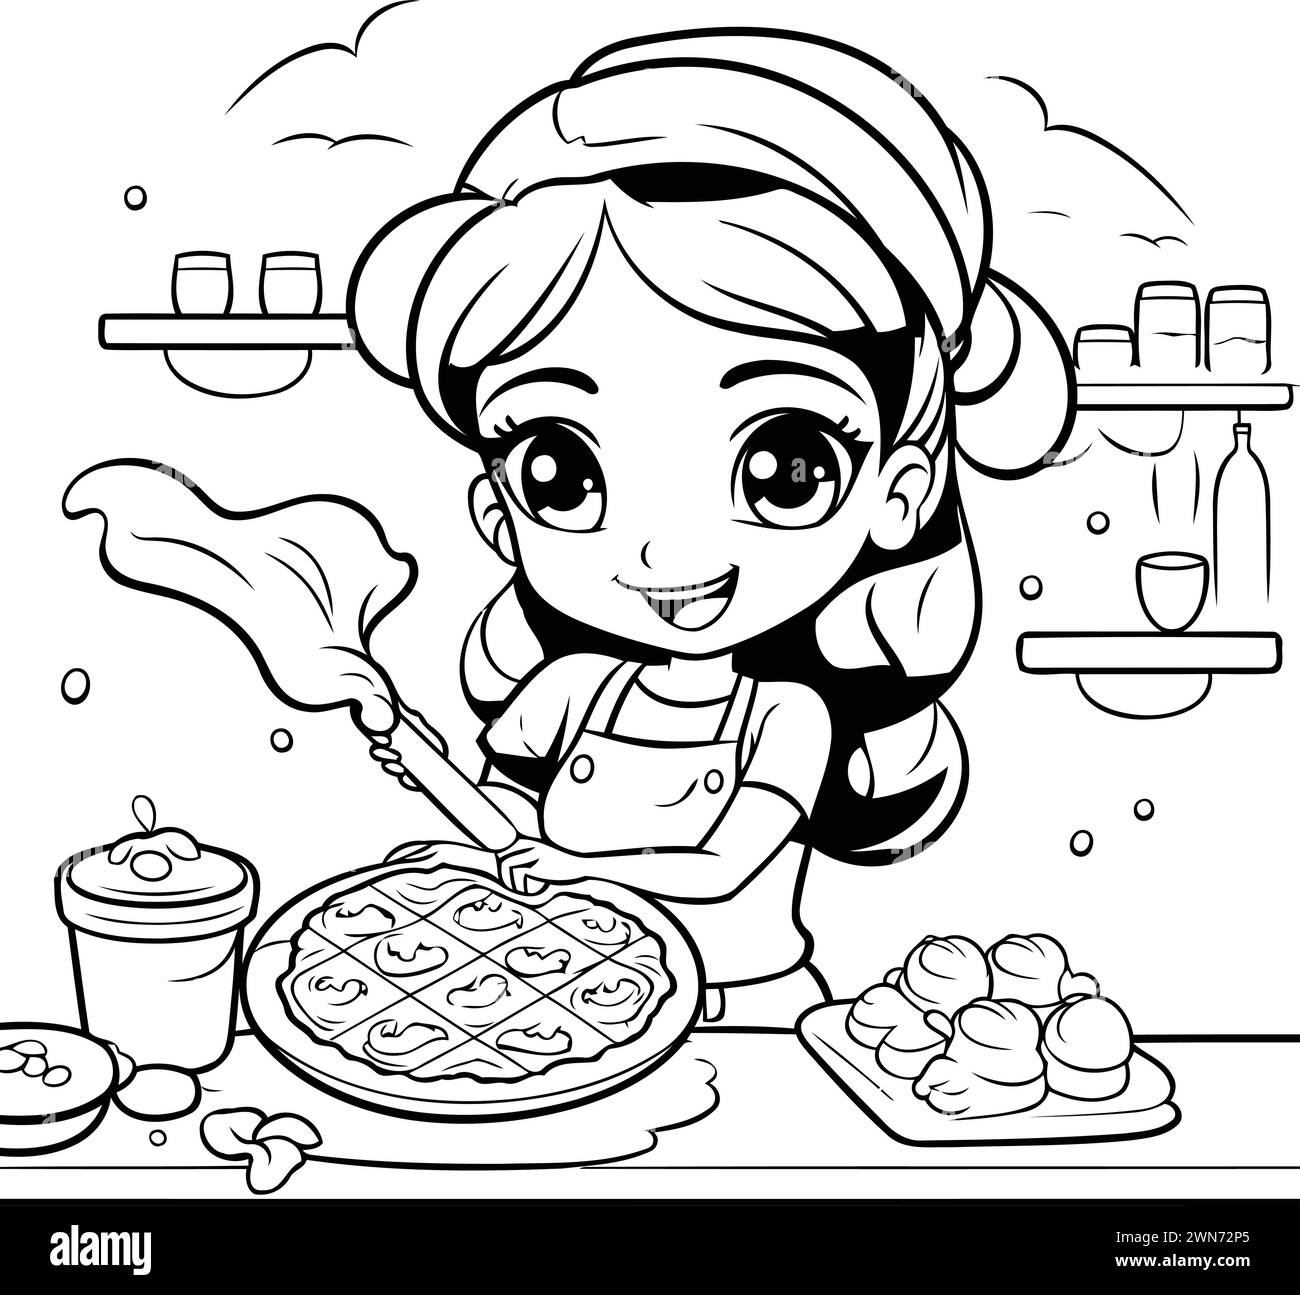 Black and White Cartoon Illustration of Little Girl Cooking Pizza for Coloring Book Stock Vector